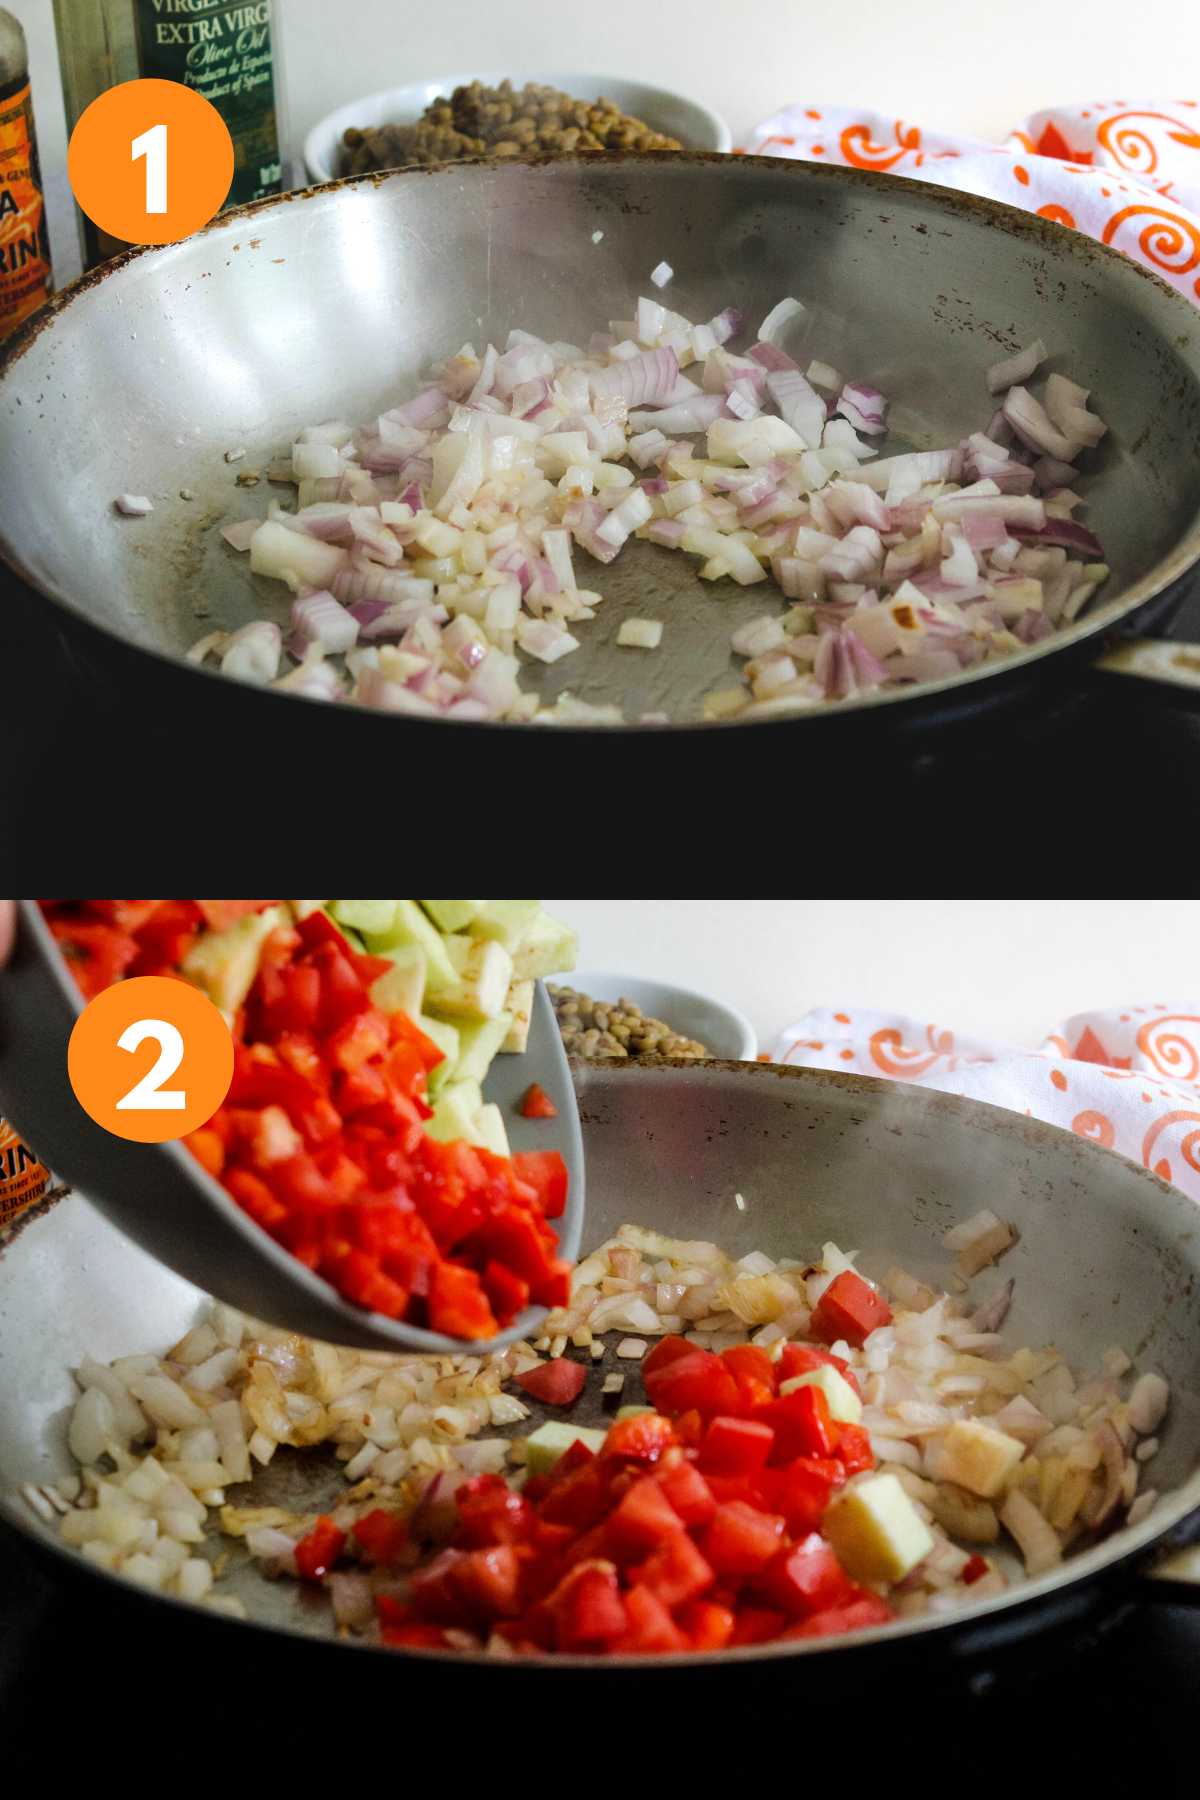 Collage of images showing cooking the vegetables in a pan to make vegan sloppy joes.